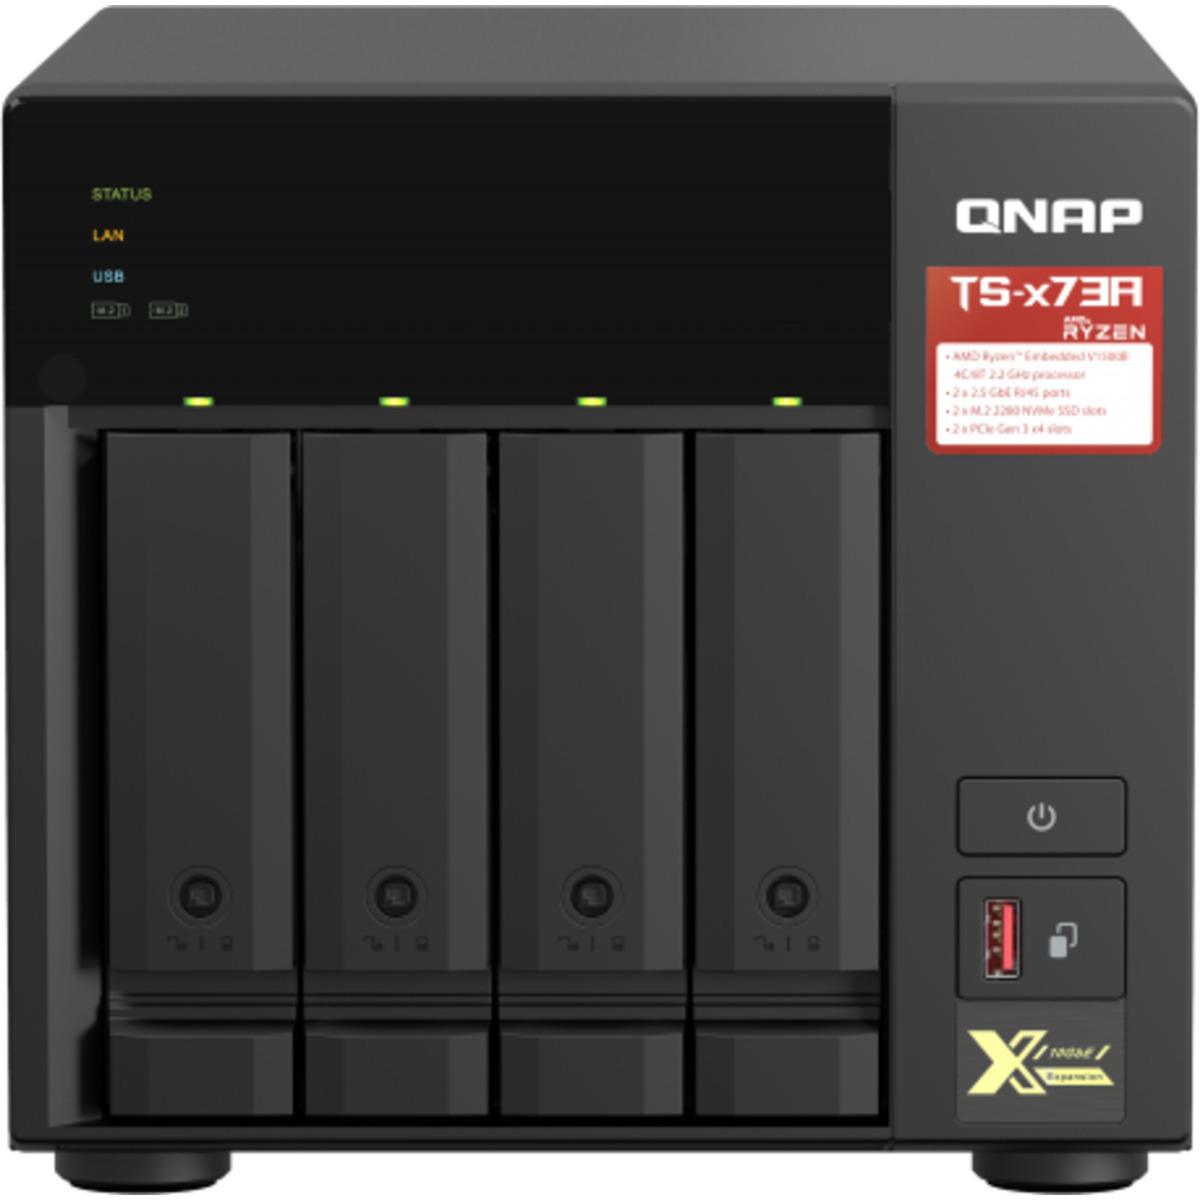 QNAP TS-473A 40tb 4-Bay Desktop Multimedia / Power User / Business NAS - Network Attached Storage Device 4x10tb Seagate EXOS X18 ST10000NM018G 3.5 7200rpm SATA 6Gb/s HDD ENTERPRISE Class Drives Installed - Burn-In Tested TS-473A